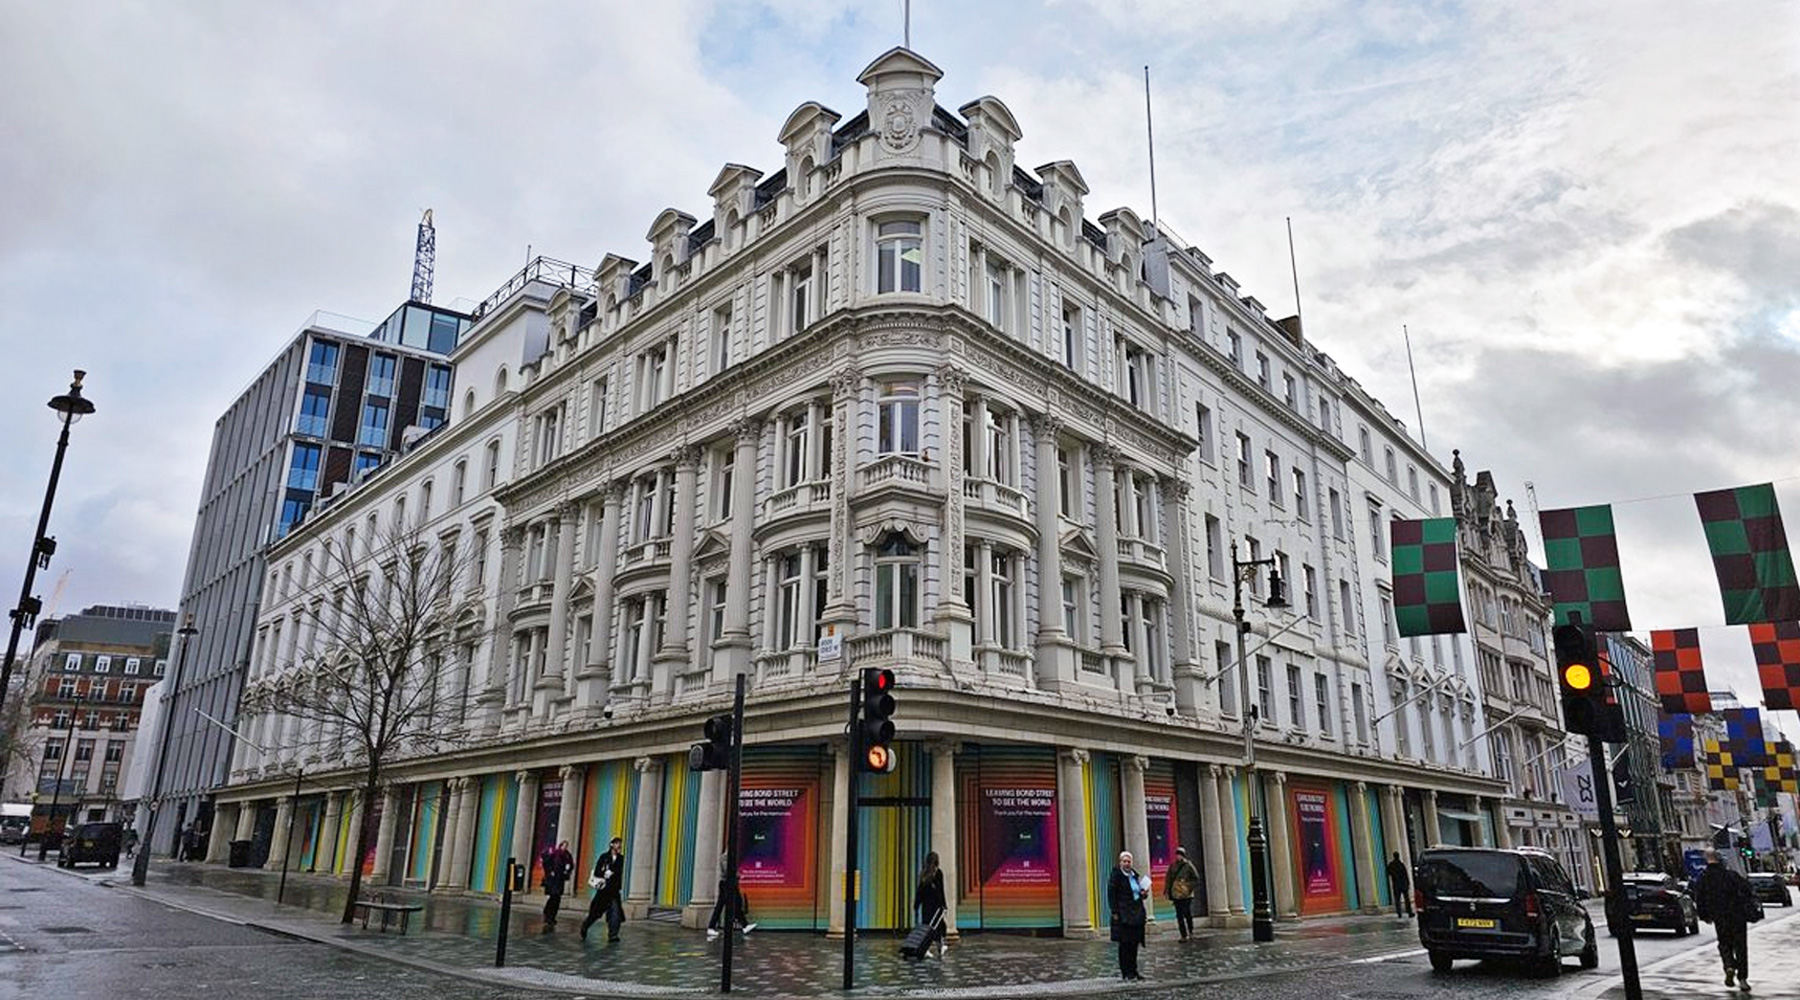 Fenwick on Bond Street to be converted into offices